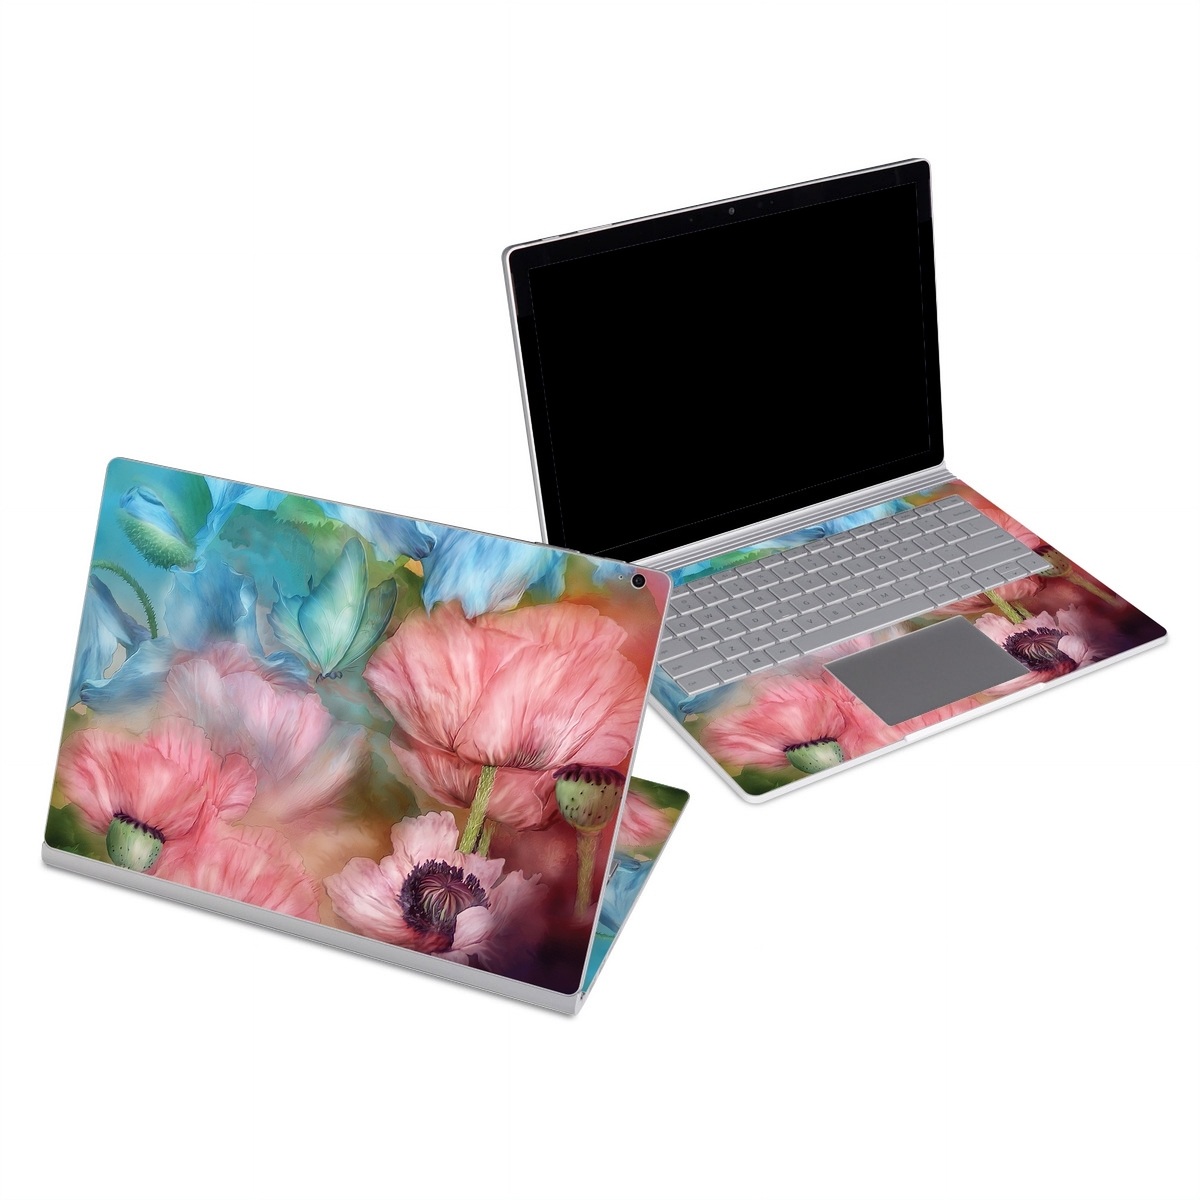 Microsoft Surface Book Series Skin design of Flower, Petal, Watercolor paint, Painting, Plant, Flowering plant, Pink, Botany, Wildflower, Still life, with gray, blue, black, red, green colors